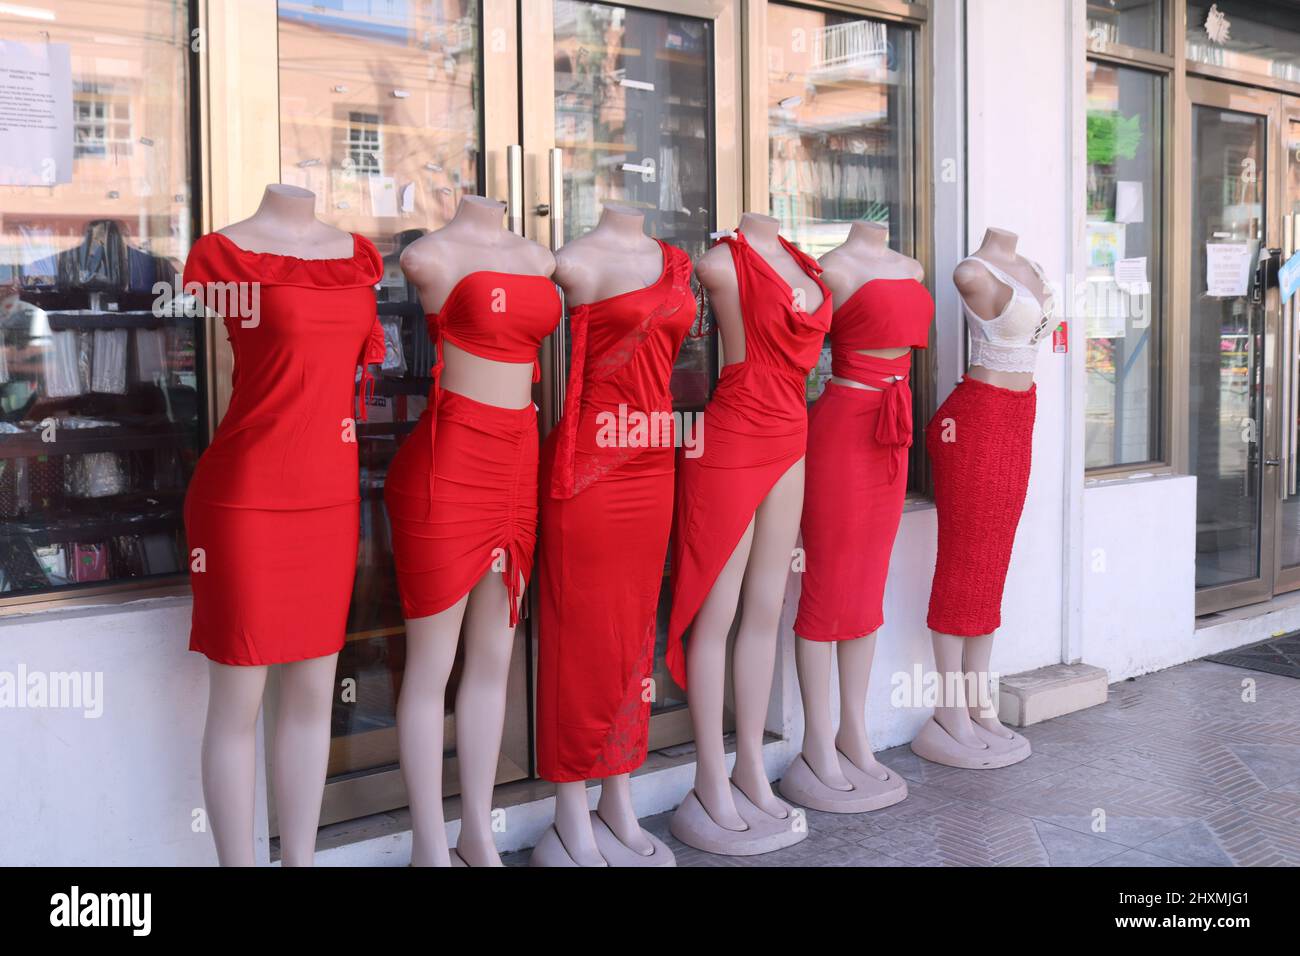 Six female mannequins wearing different red dresses outside a shop in St John's on Antigua and Barbuda Stock Photo